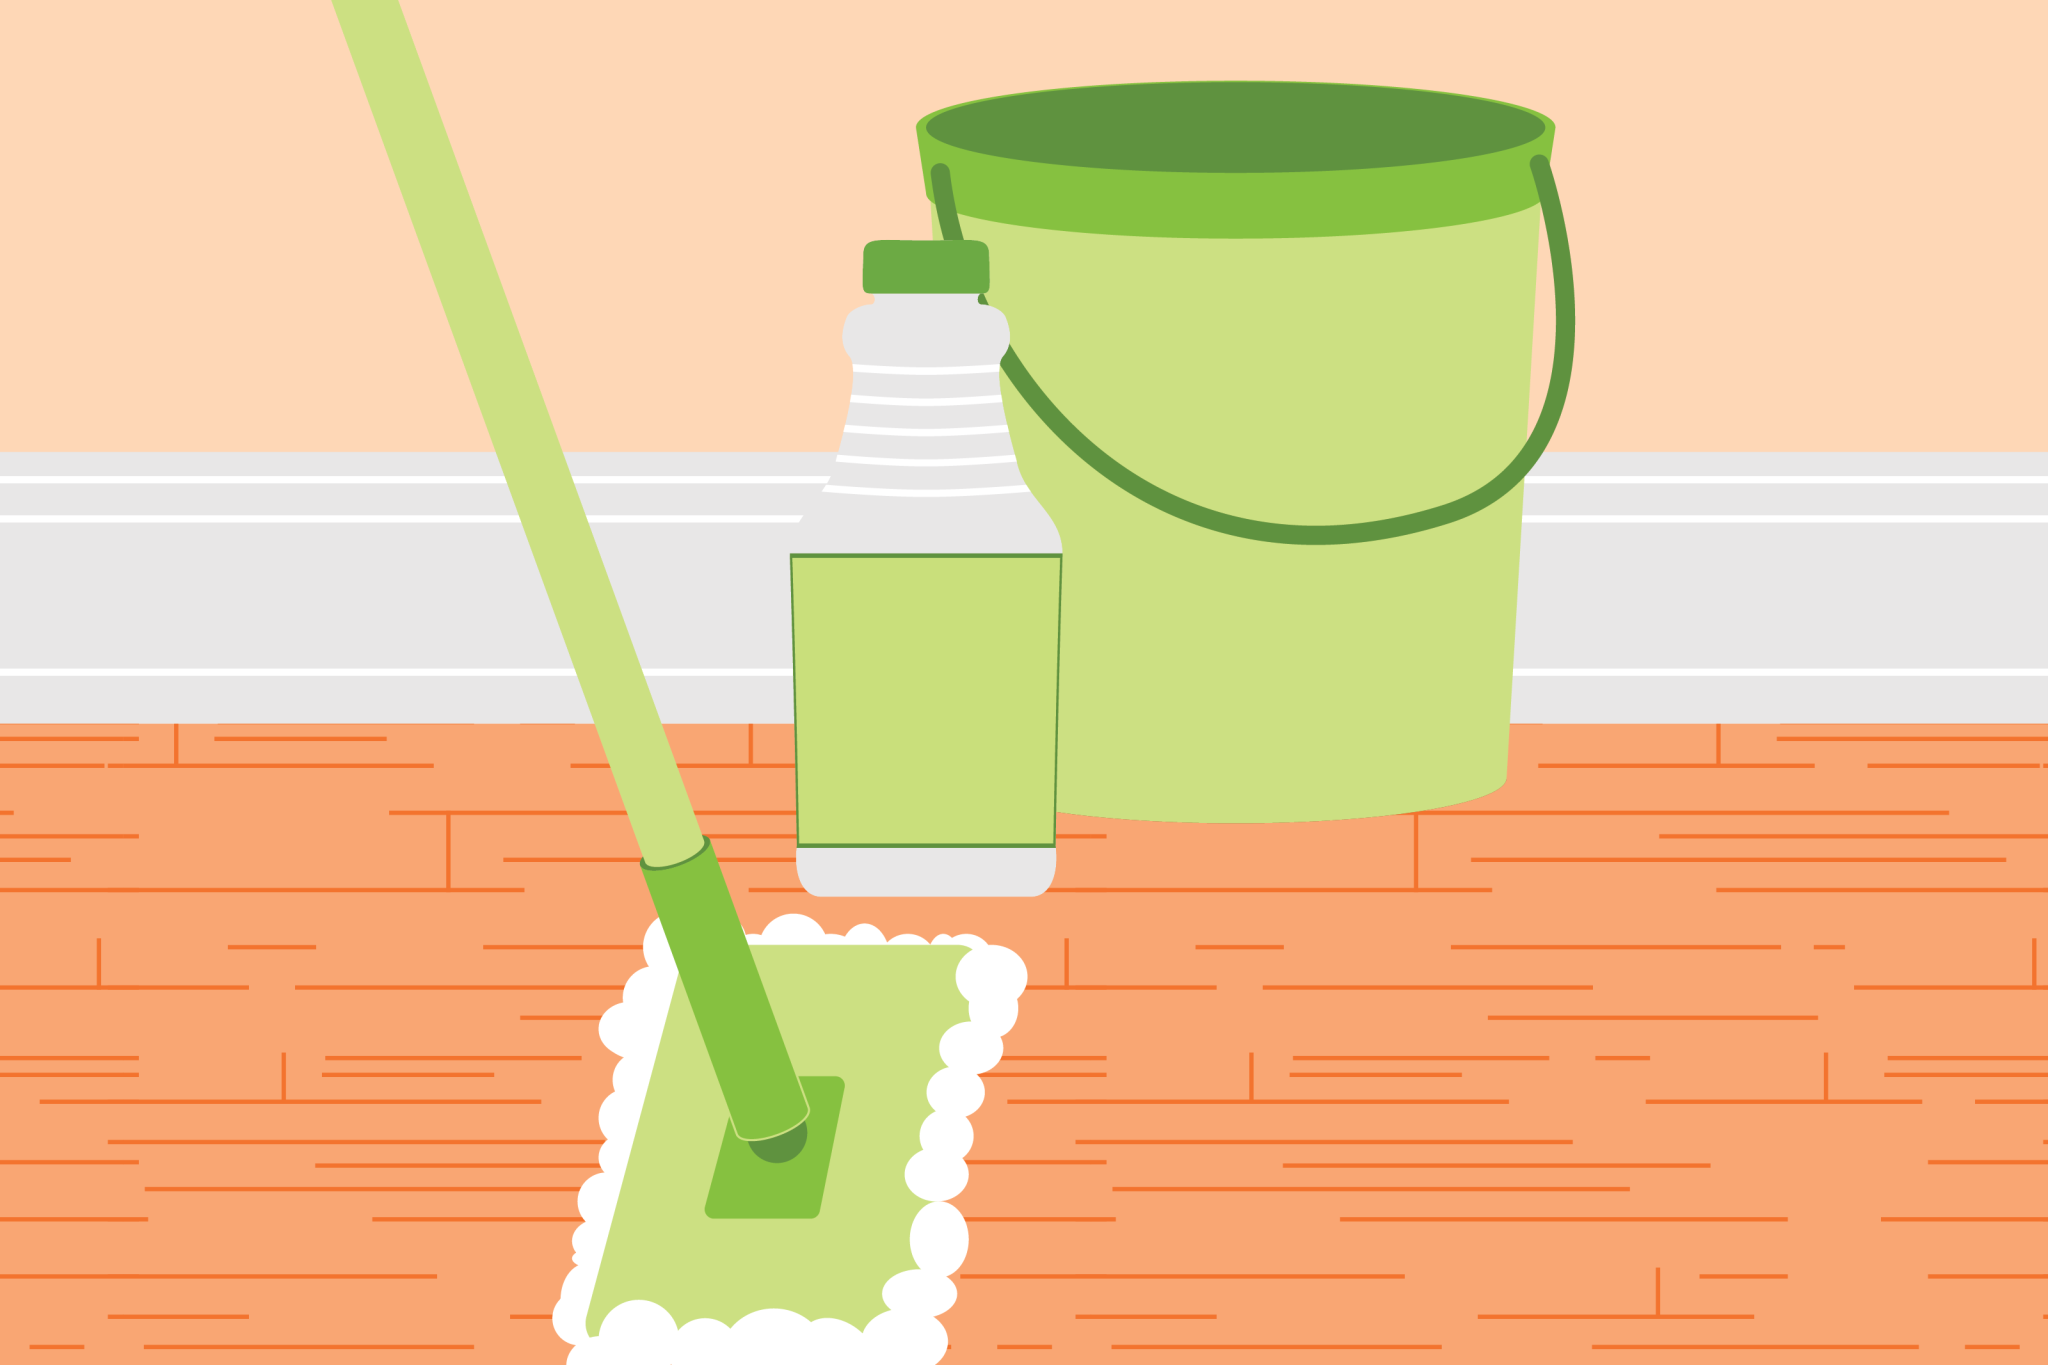 How to Select the Right Floor Cleaning Equipment for Your School